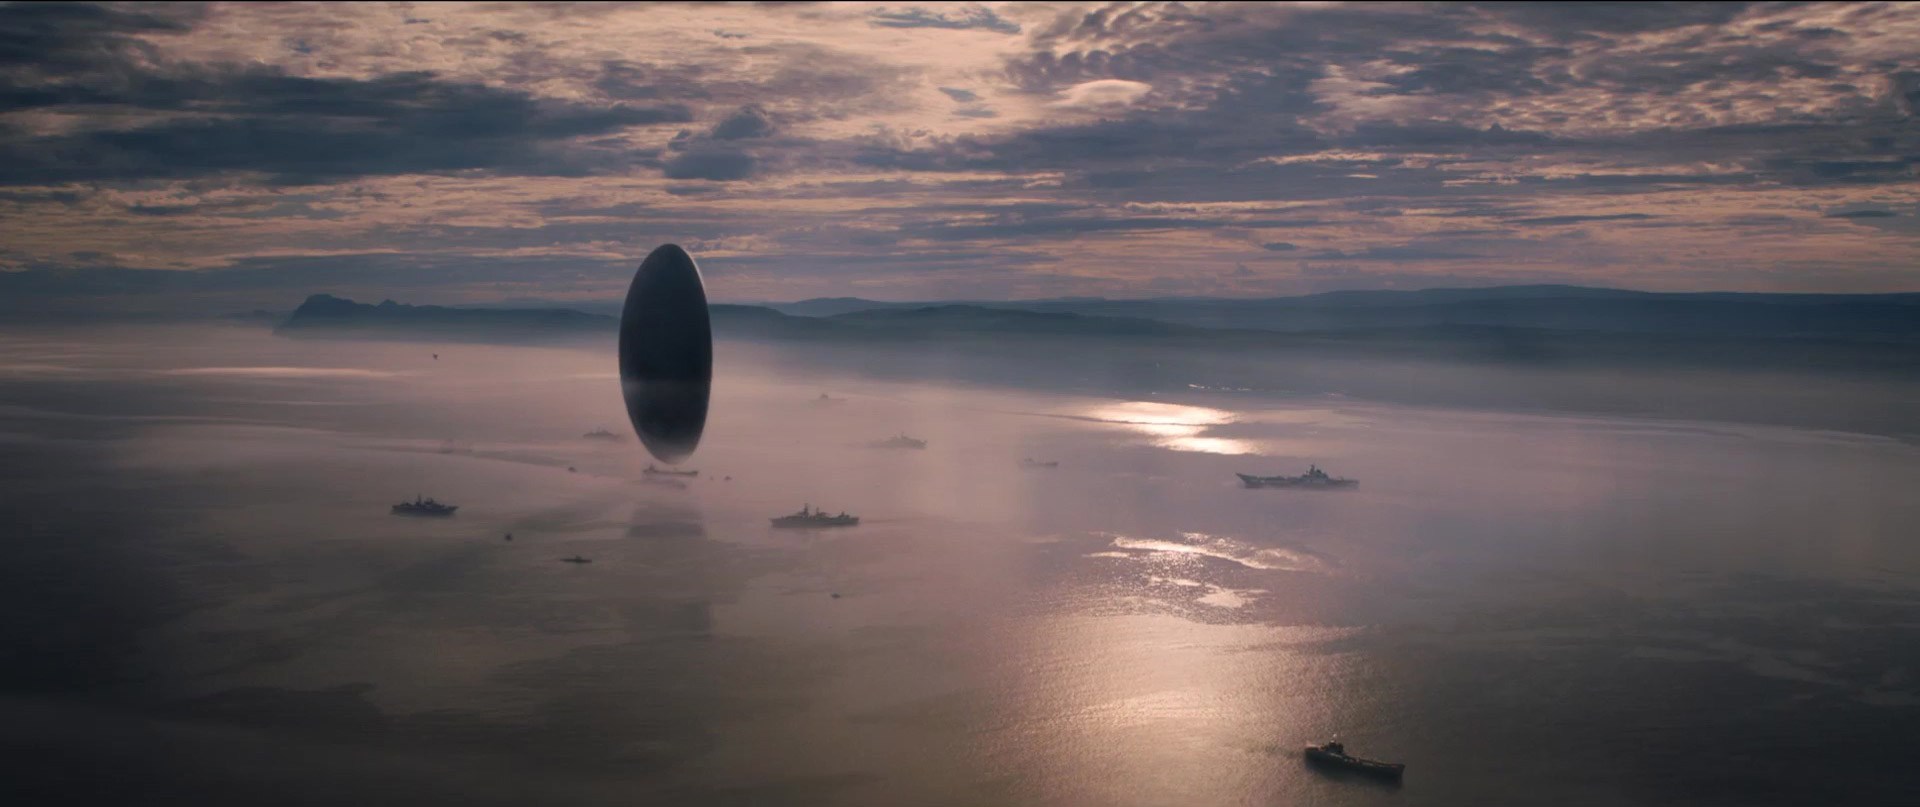 Arrival Ending: 6 Questions We’re Still Thinking About